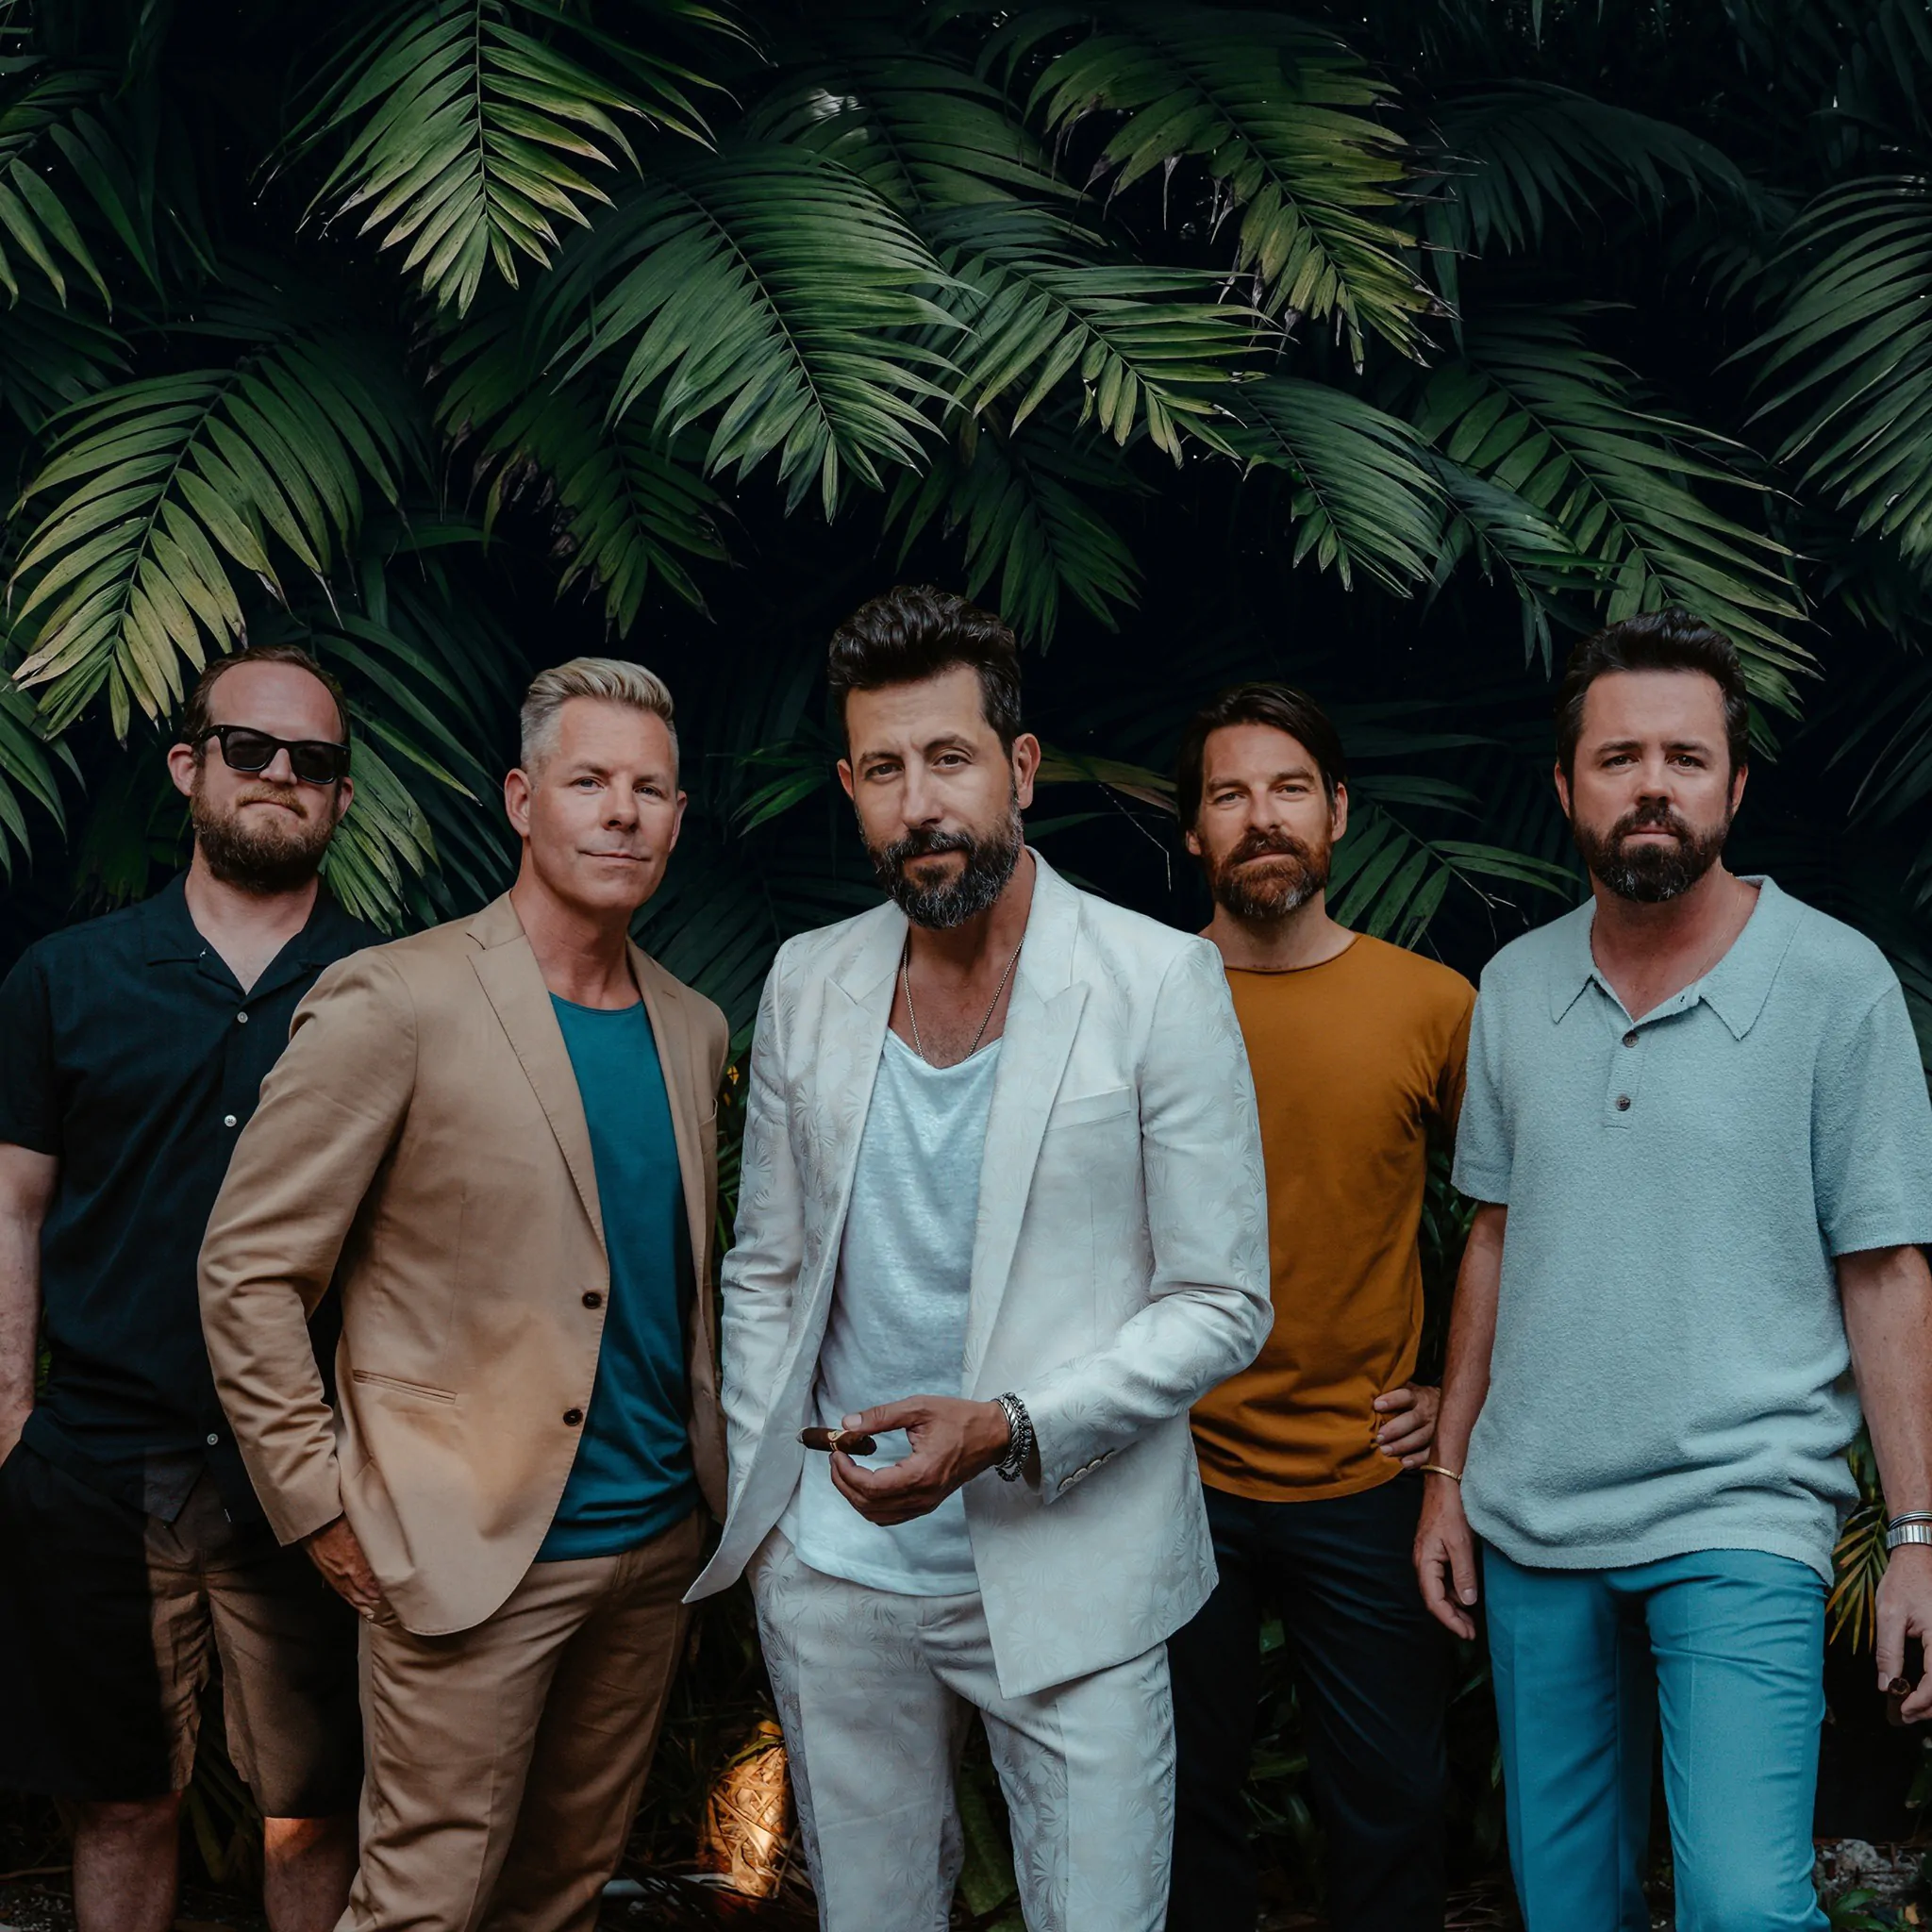 OLD DOMINION return with new album ‘Time, Tequila & Therapy’ in October